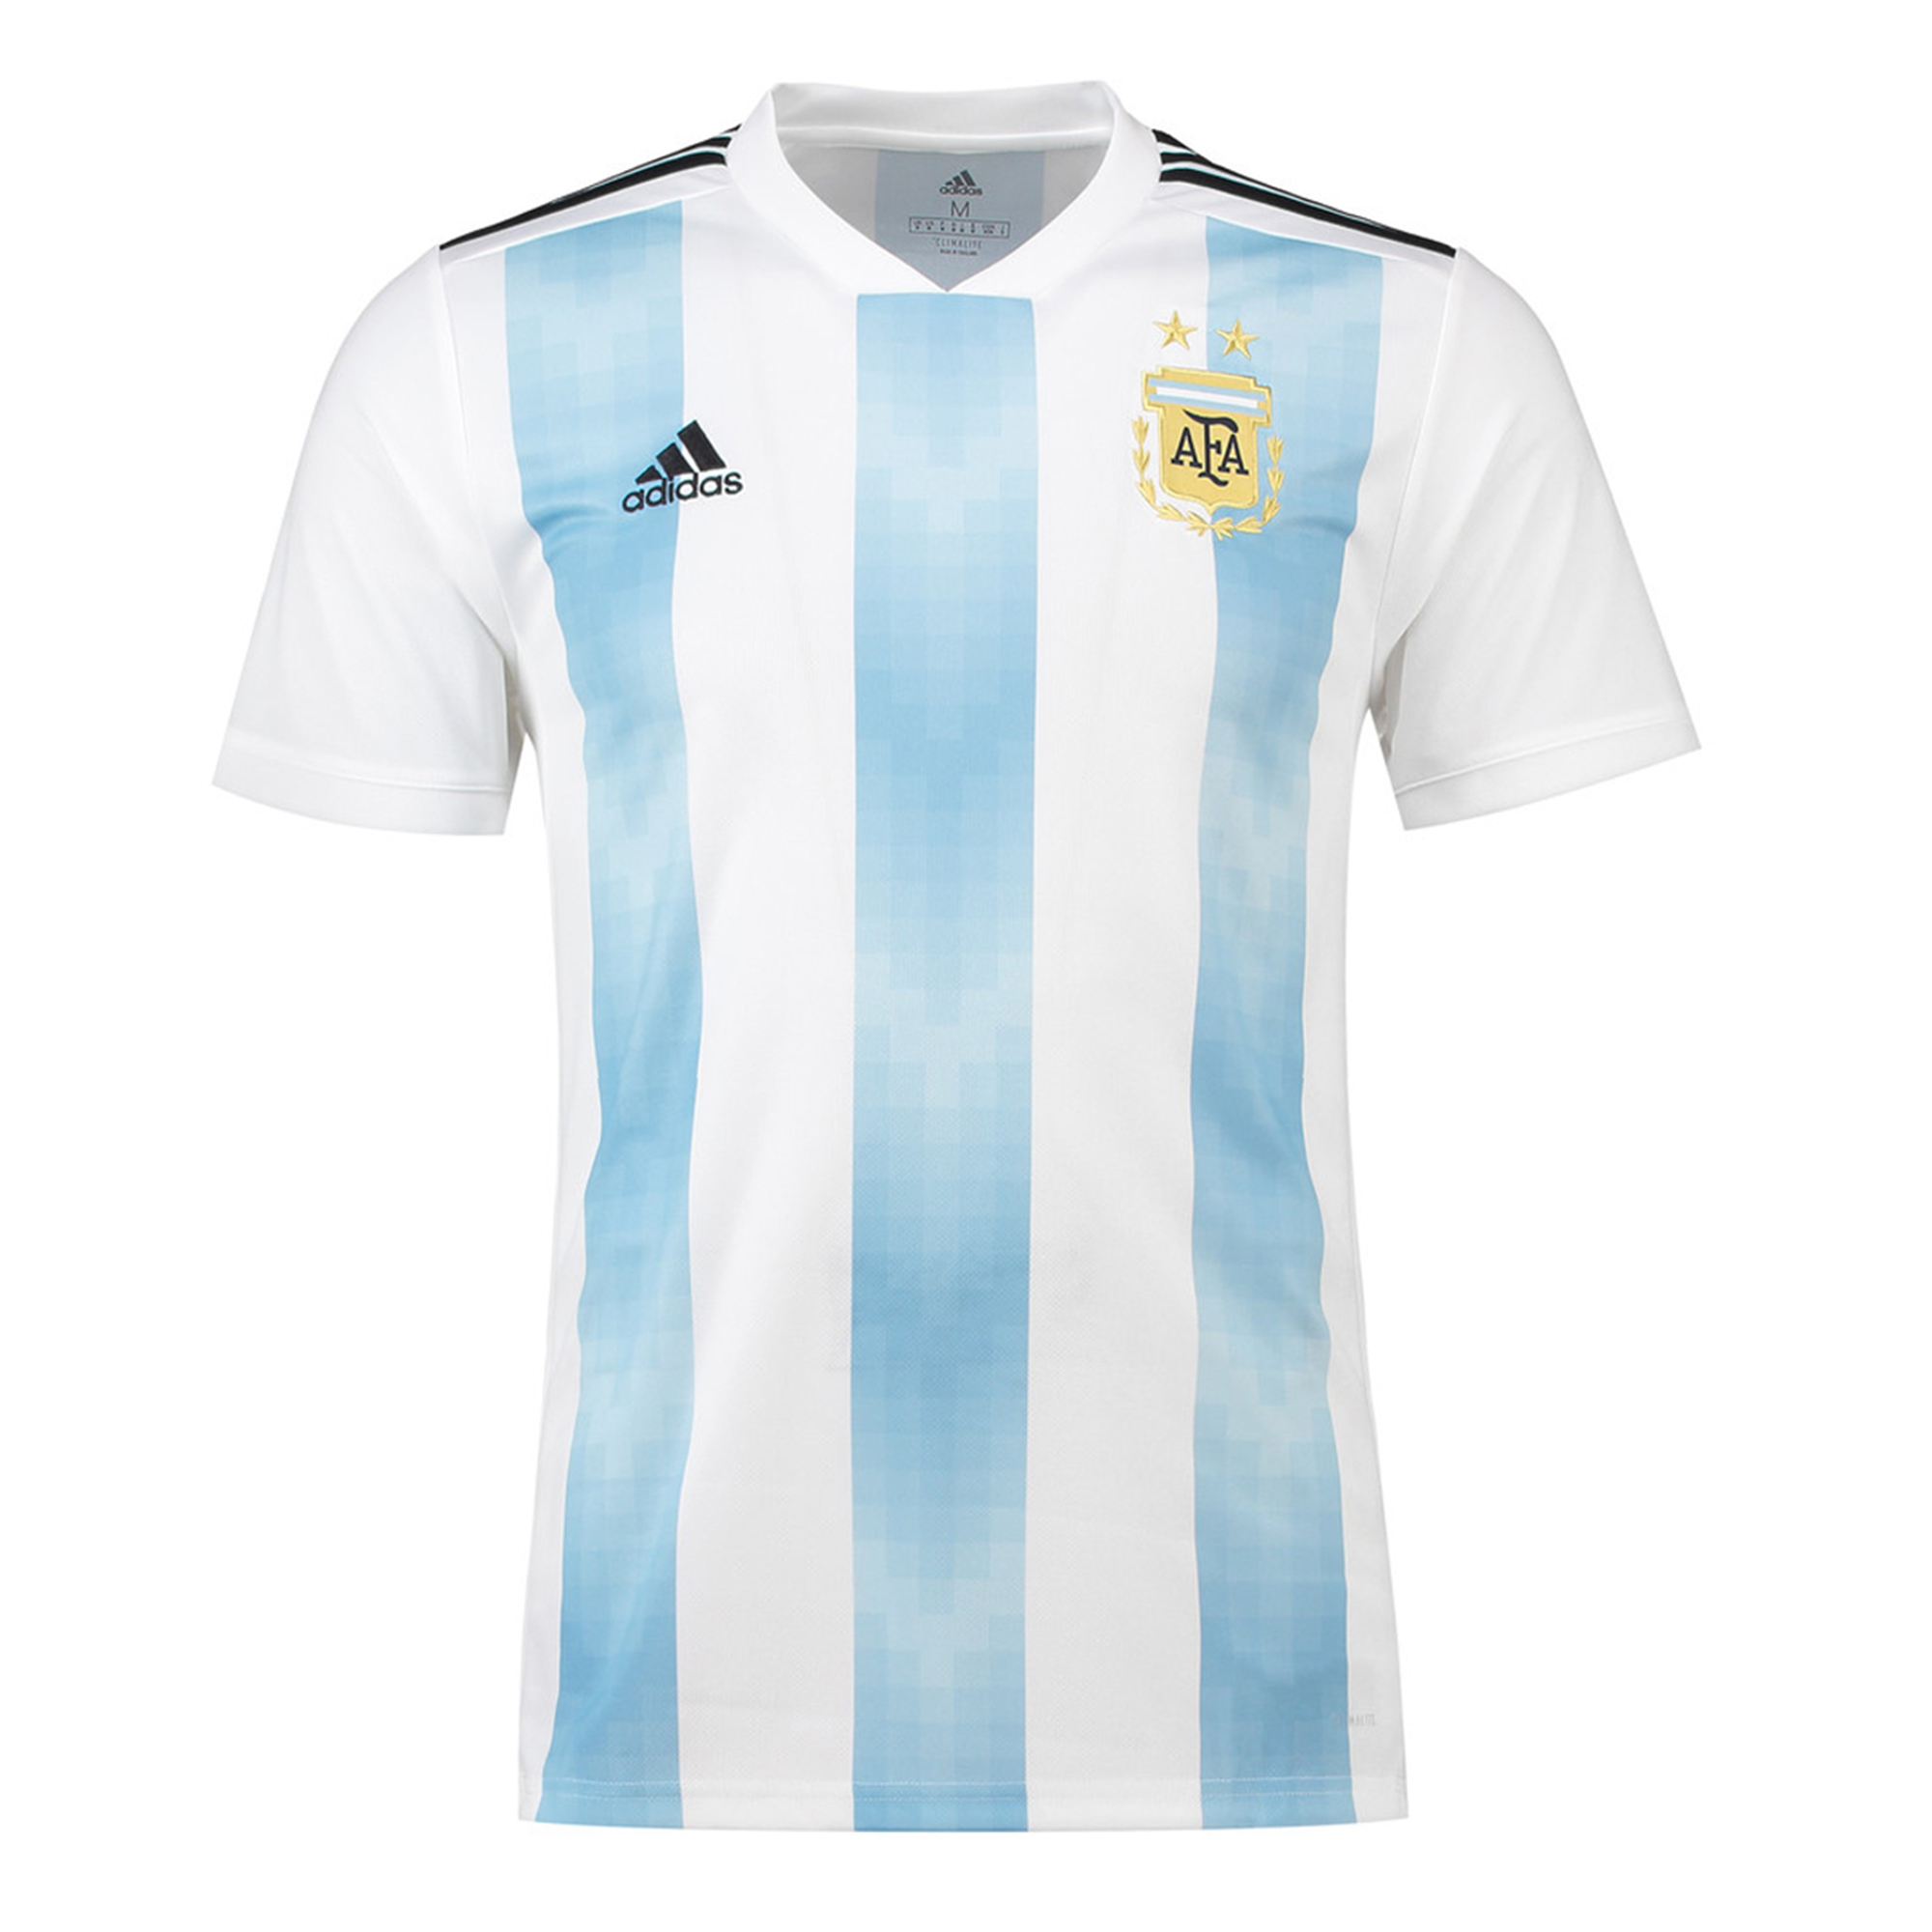 FIFA World Cup 2018 Soccer Jerseys - Your Jersey